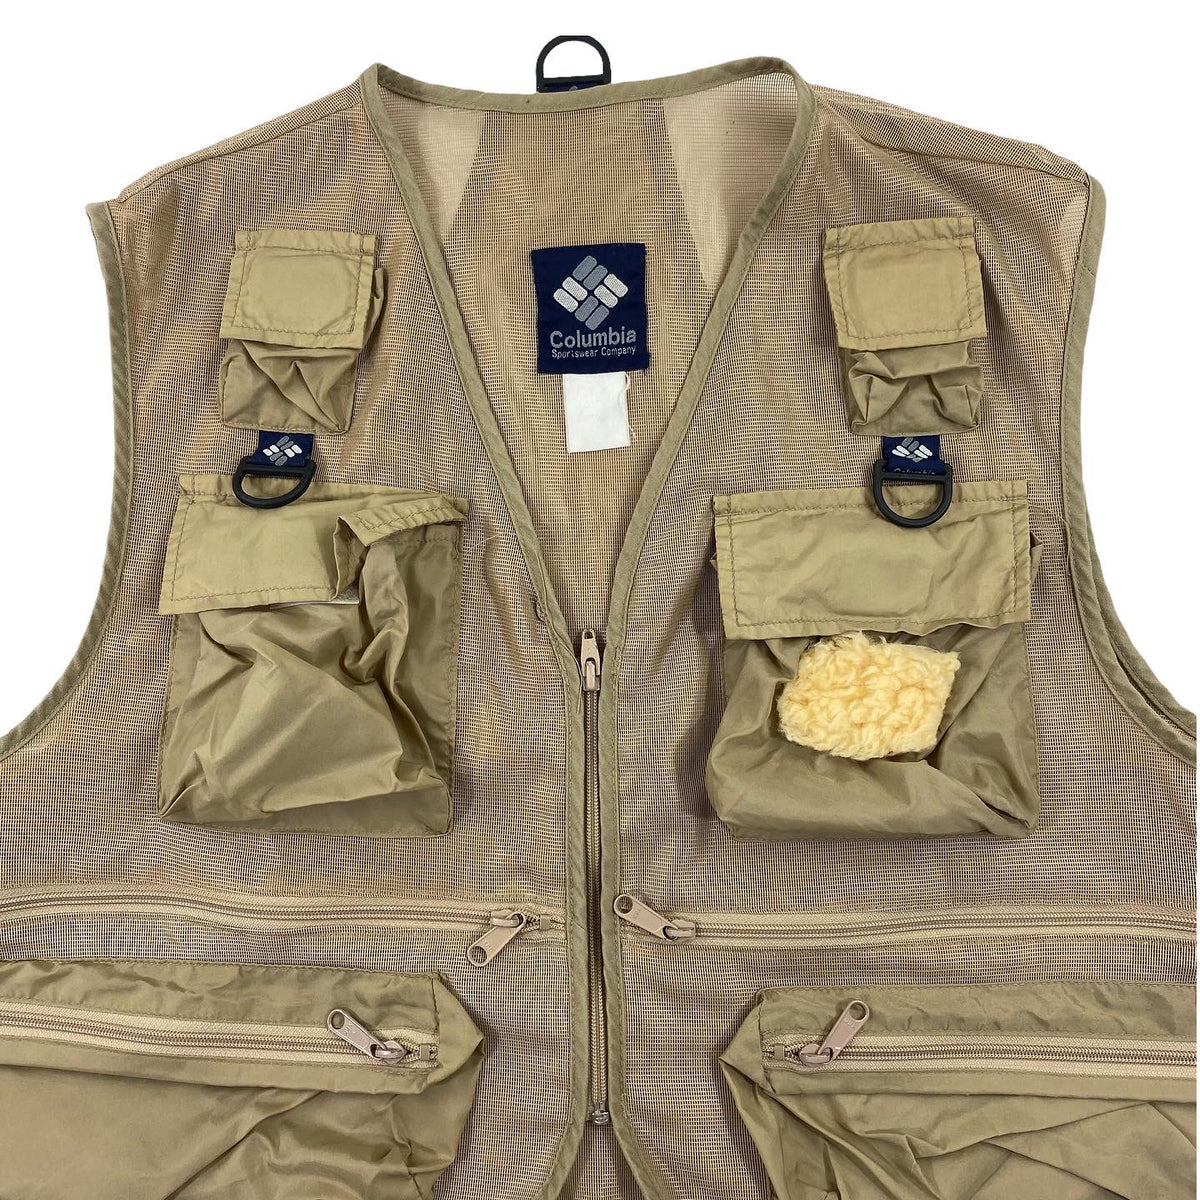 old over silhouette fishing vest - ベスト